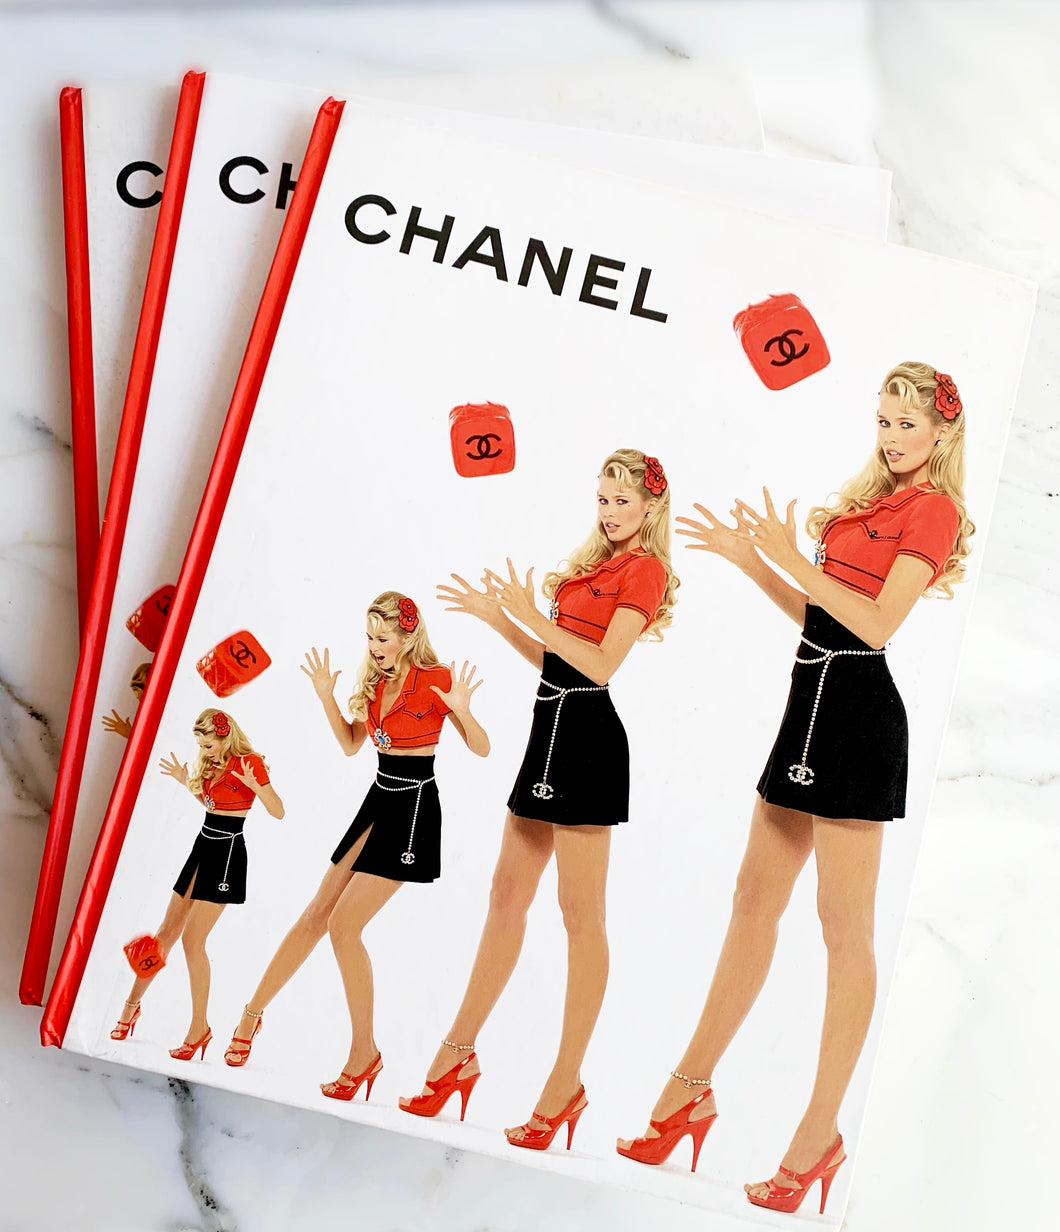 CHANEL BARBIE 1995 SPRING COLLECTION HARDCOVER CATALOGUE CLAUDIA